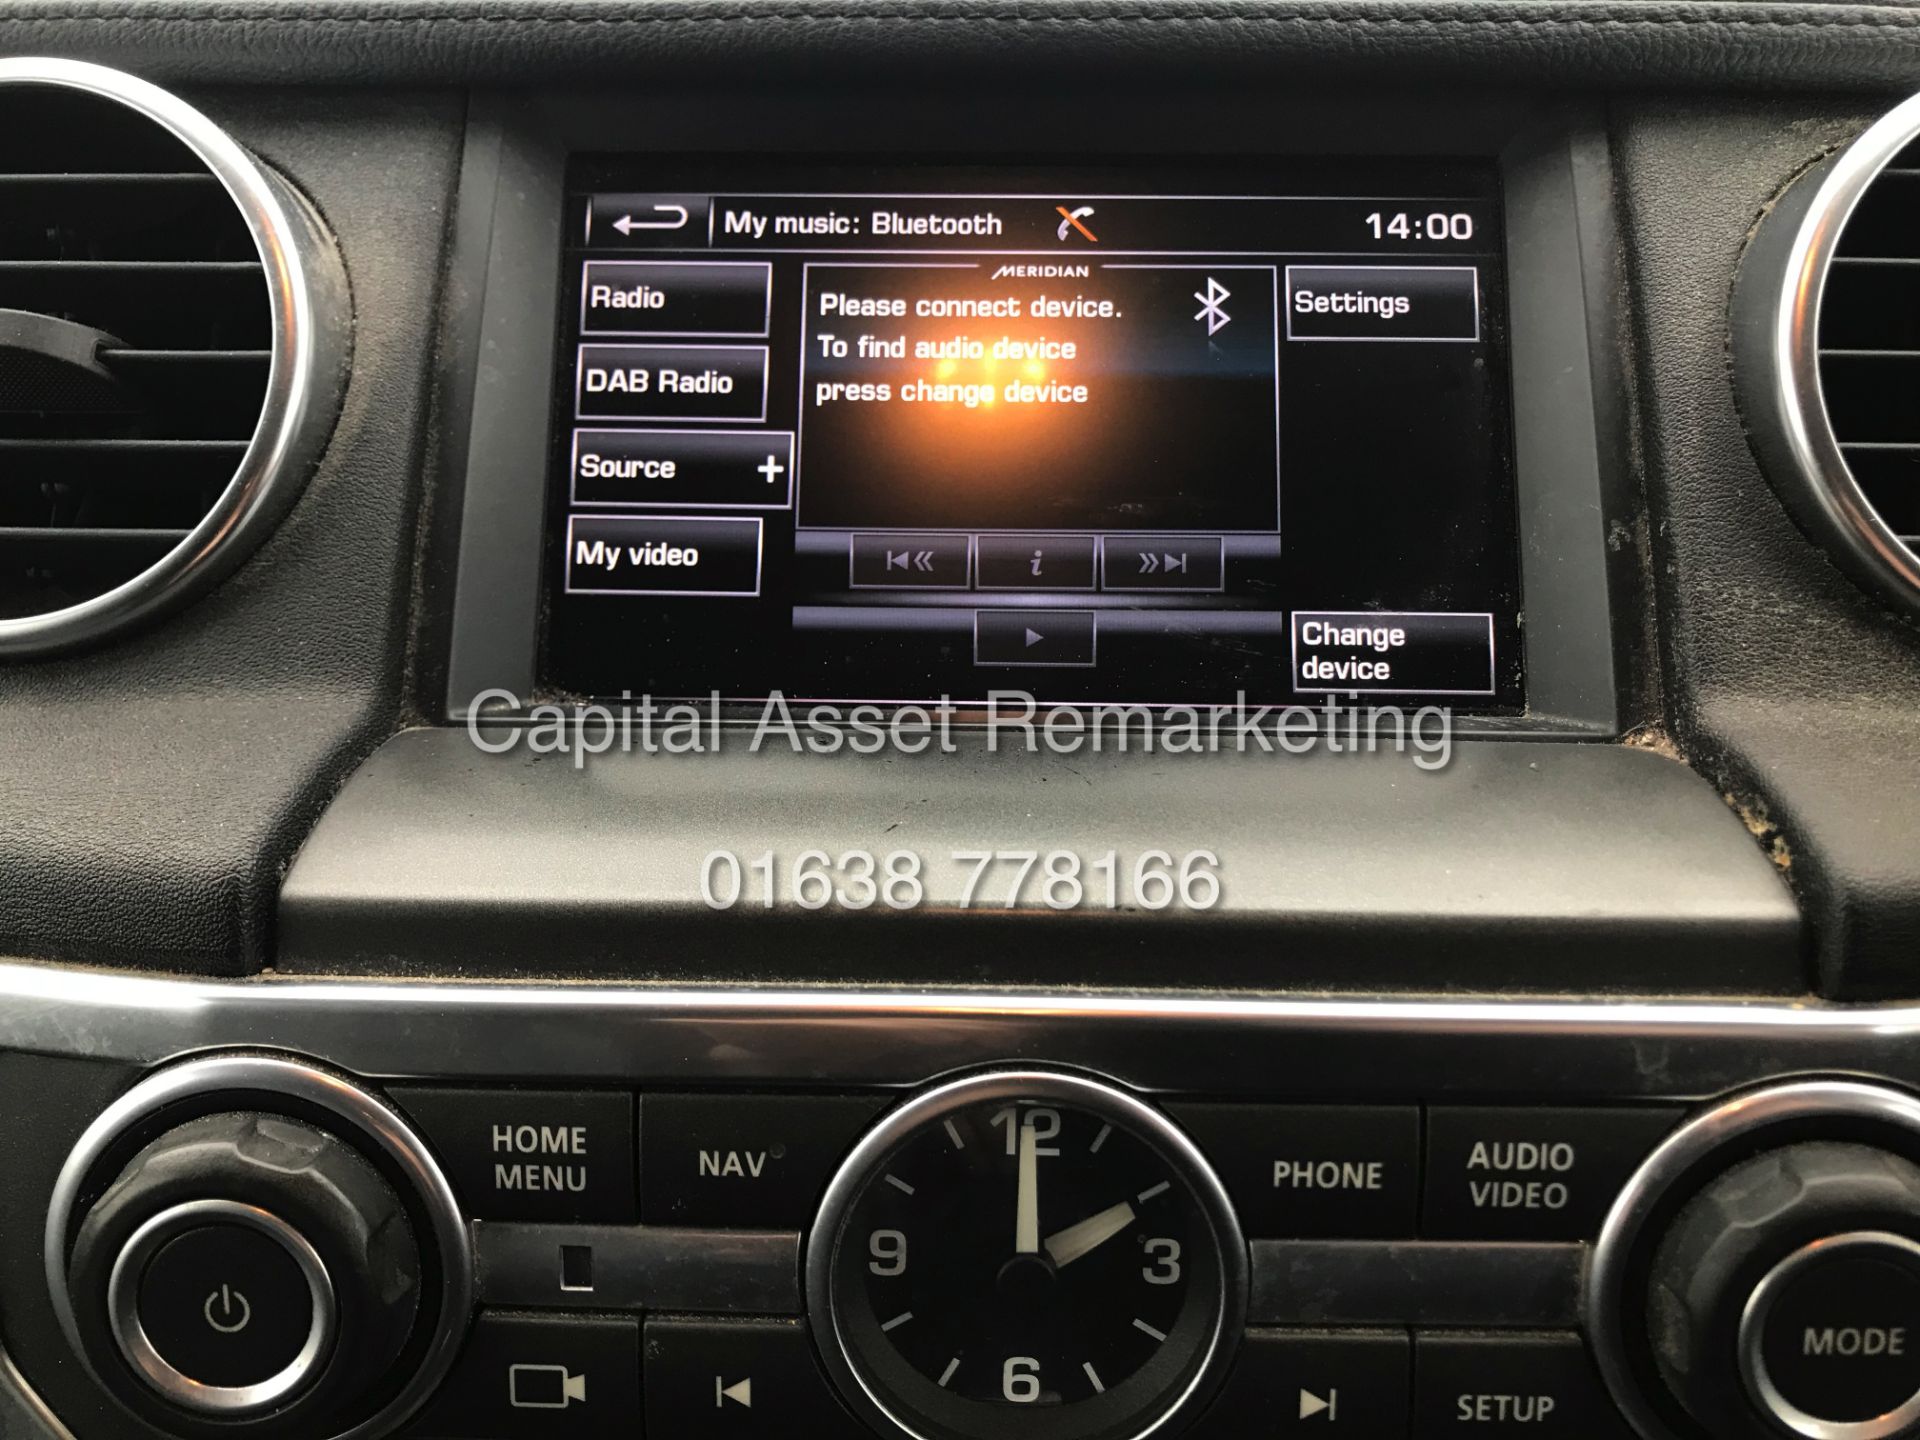 LANDROVER DISCOVERY 4 "SE" AUTO 3.0SDV6 - (2016 REG) 1 KEEPER - SAT NAV - LEATHER - HUGE SPEC -WOW! - Image 13 of 20